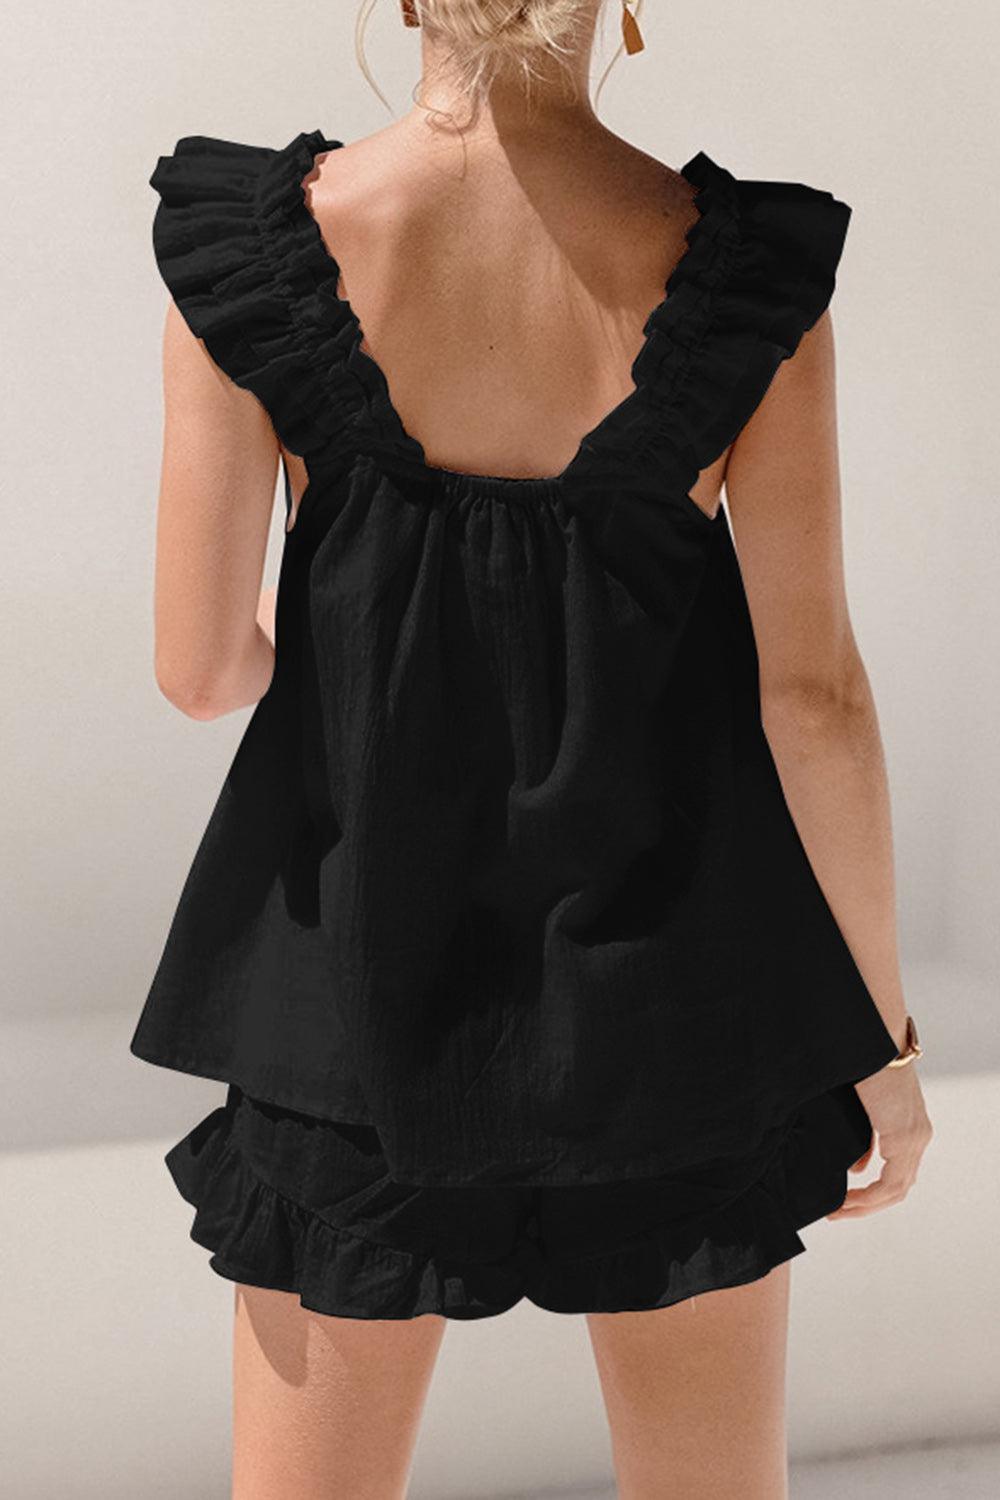 the back of a woman's black dress with ruffles